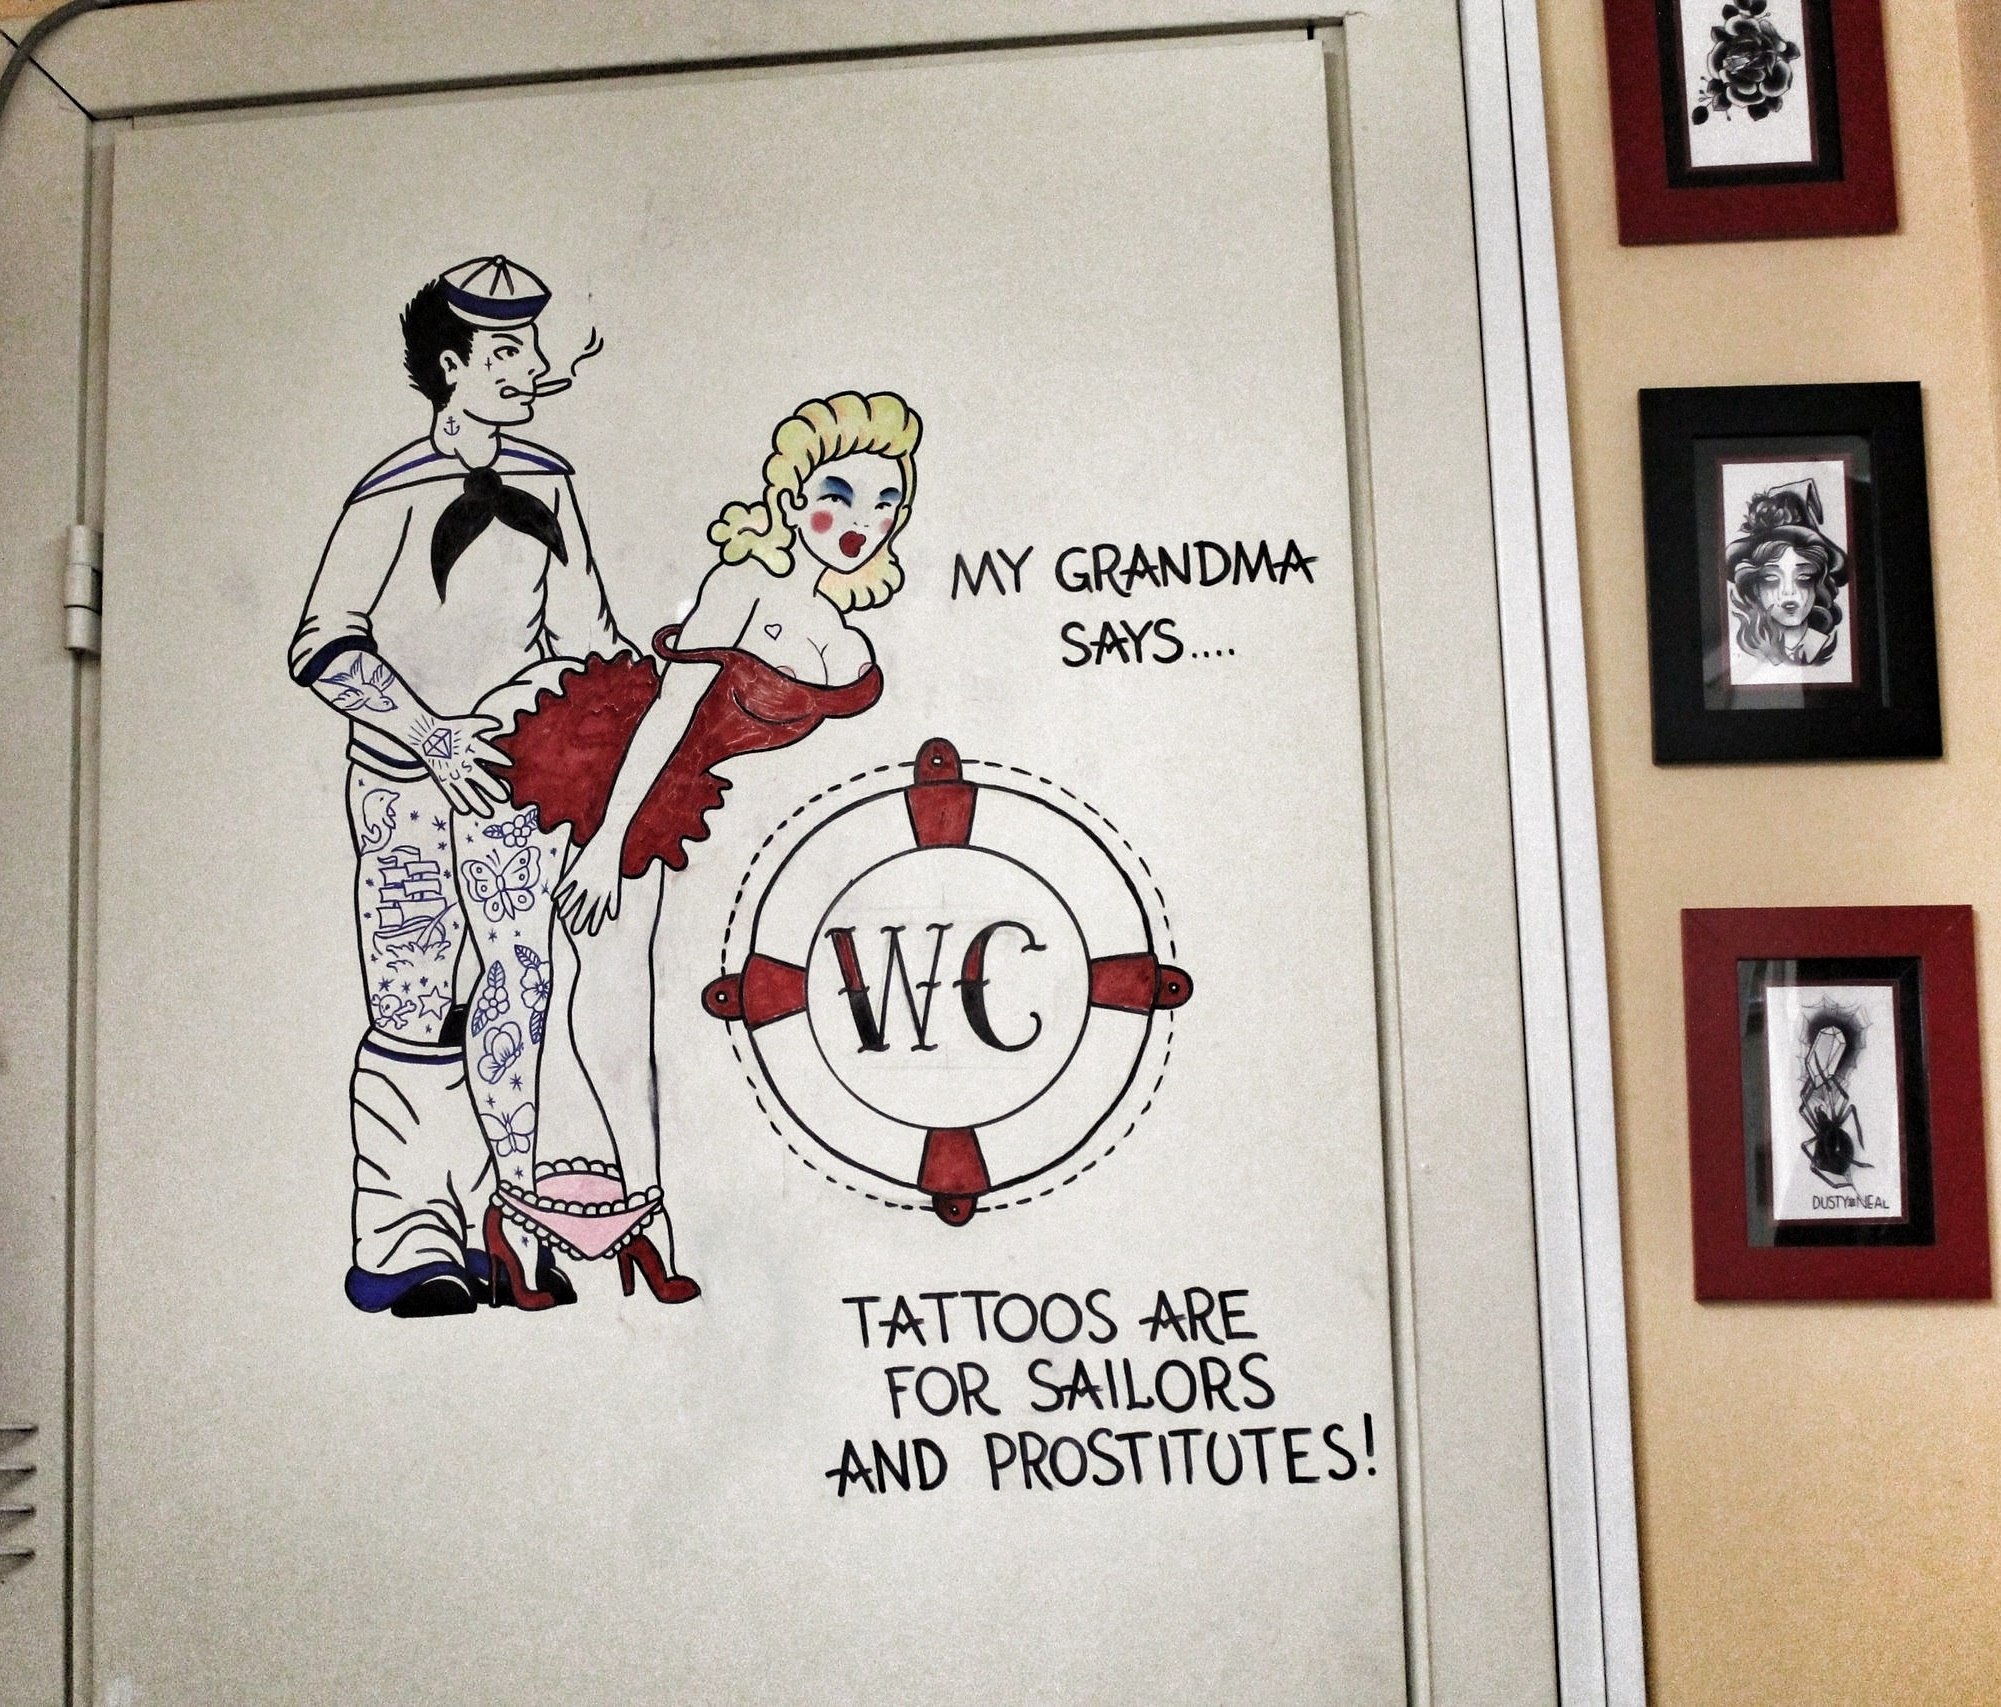 My Grandma Says.... Tattoos Are For Sailors And Prostitutes!